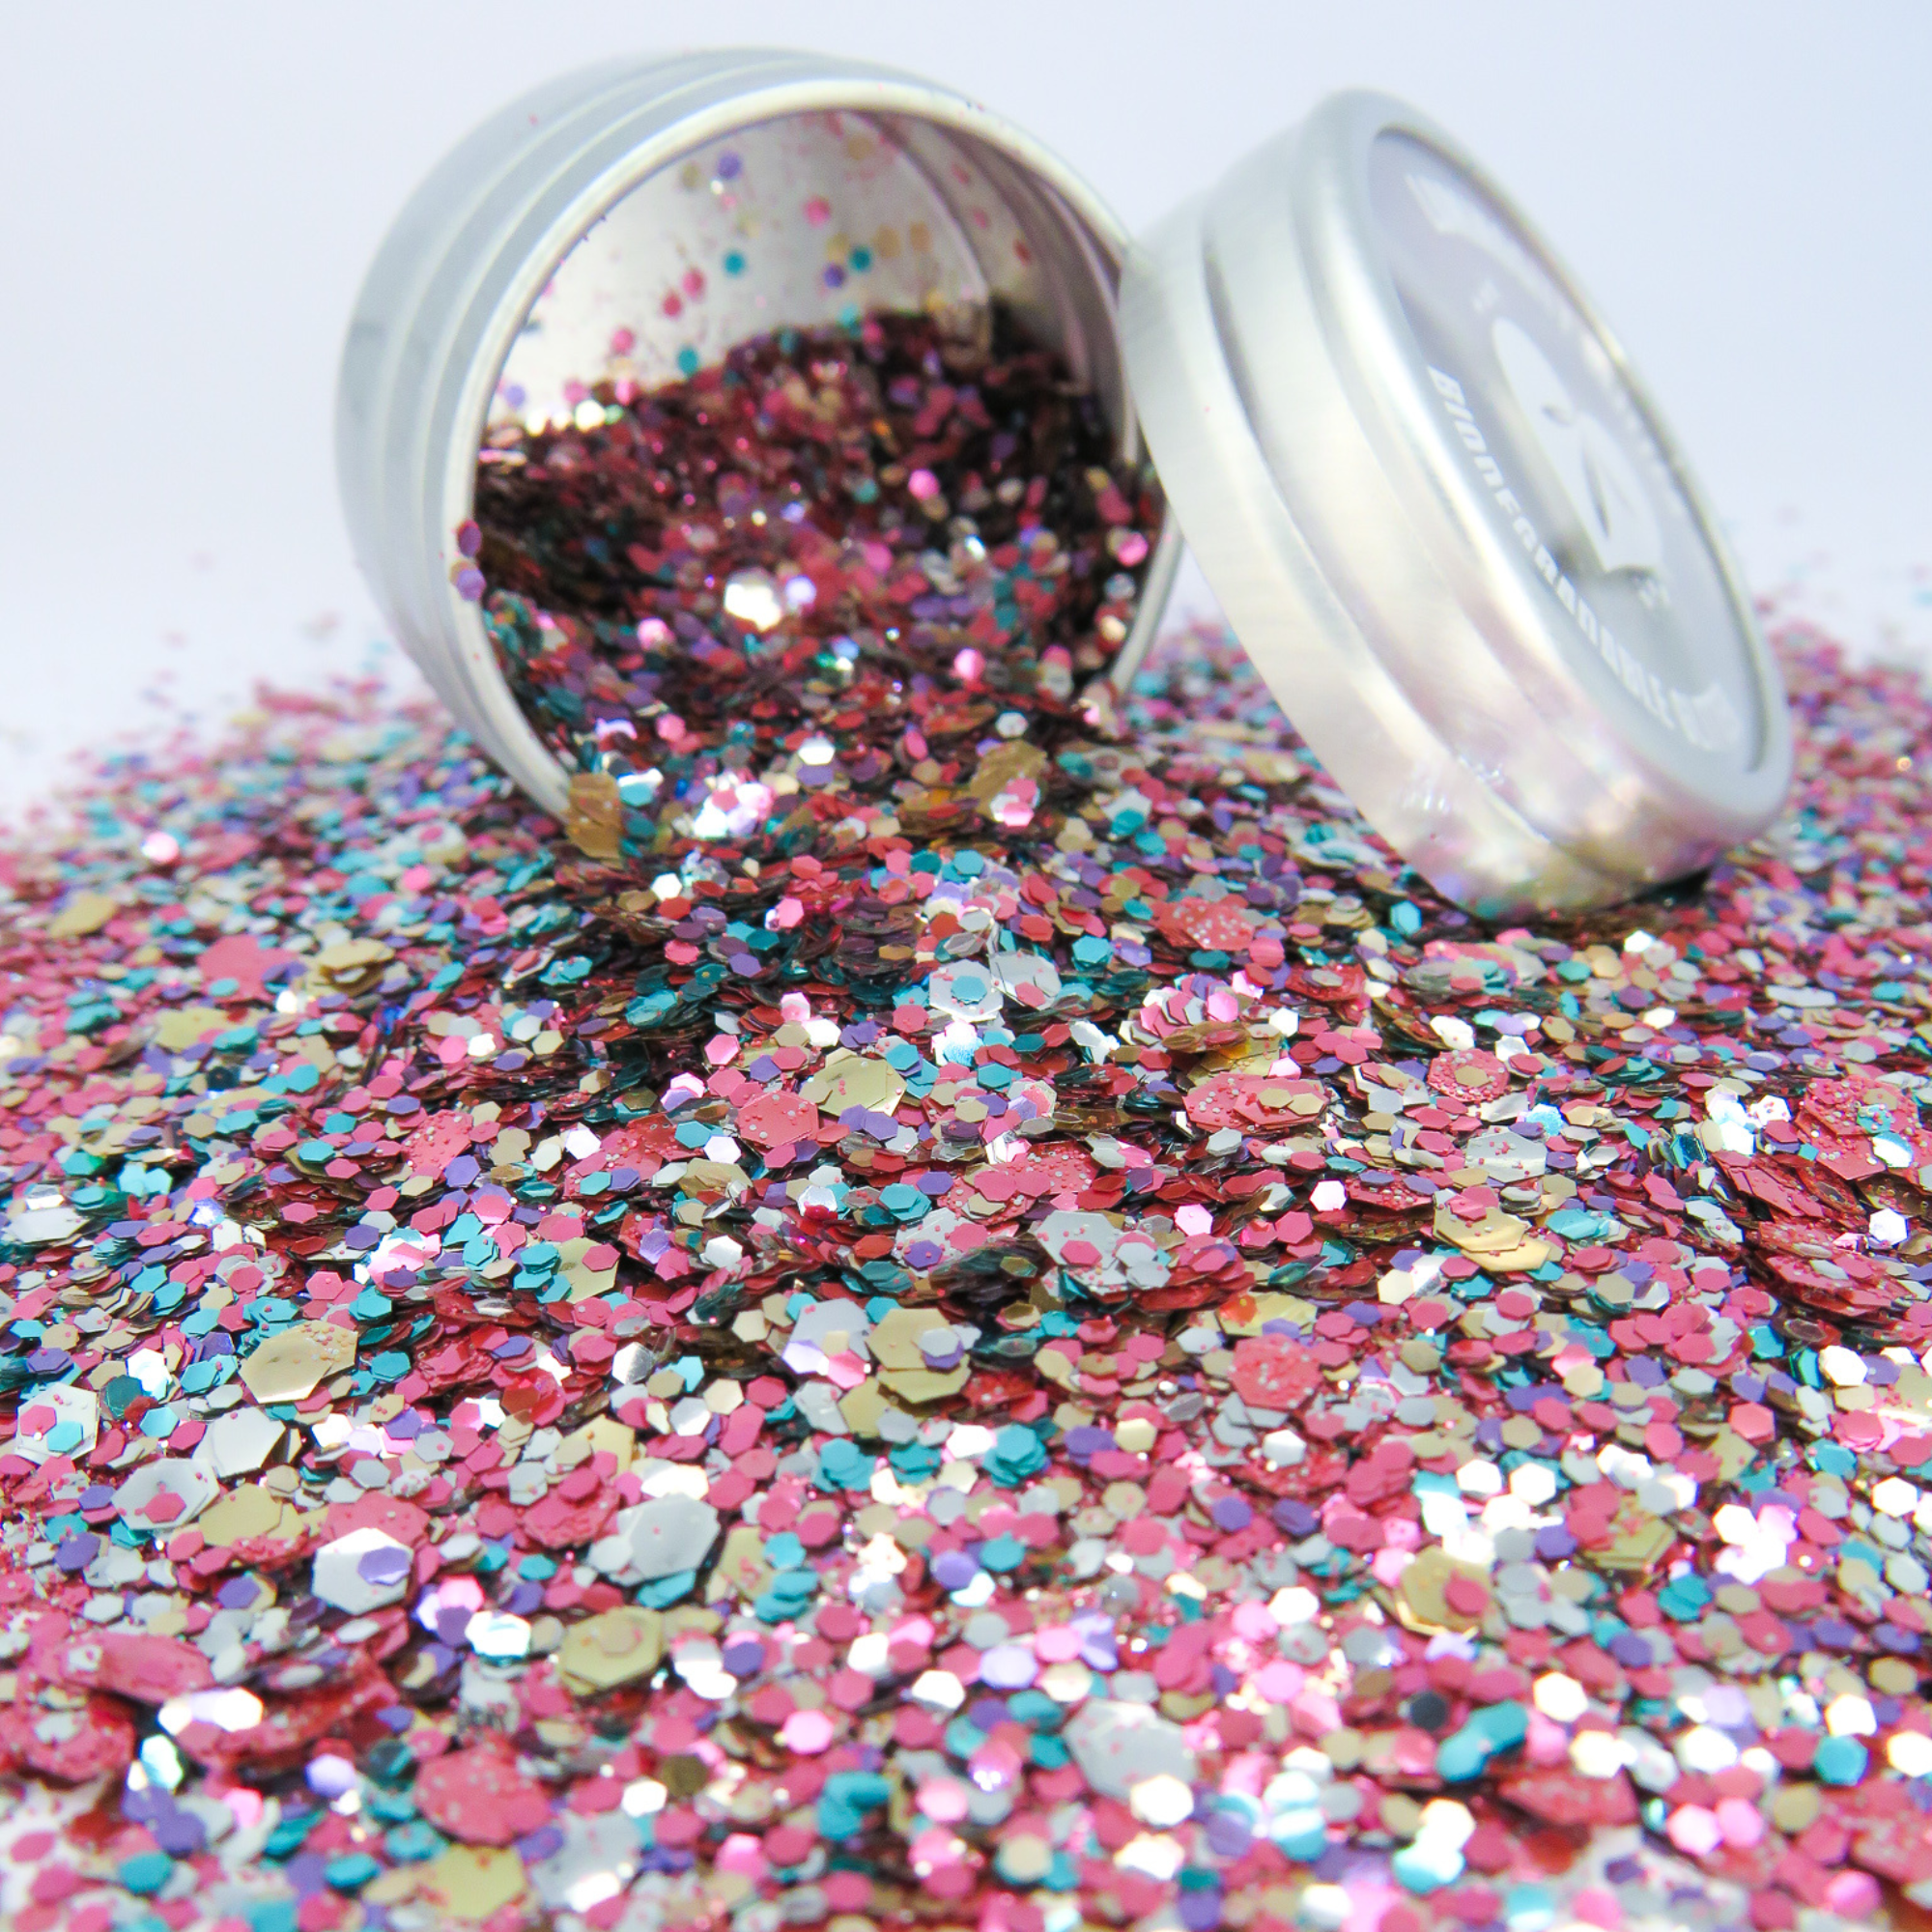 New unicorn blend of rose gold, silver, pink, purple and turquoise glitter in three sizes.